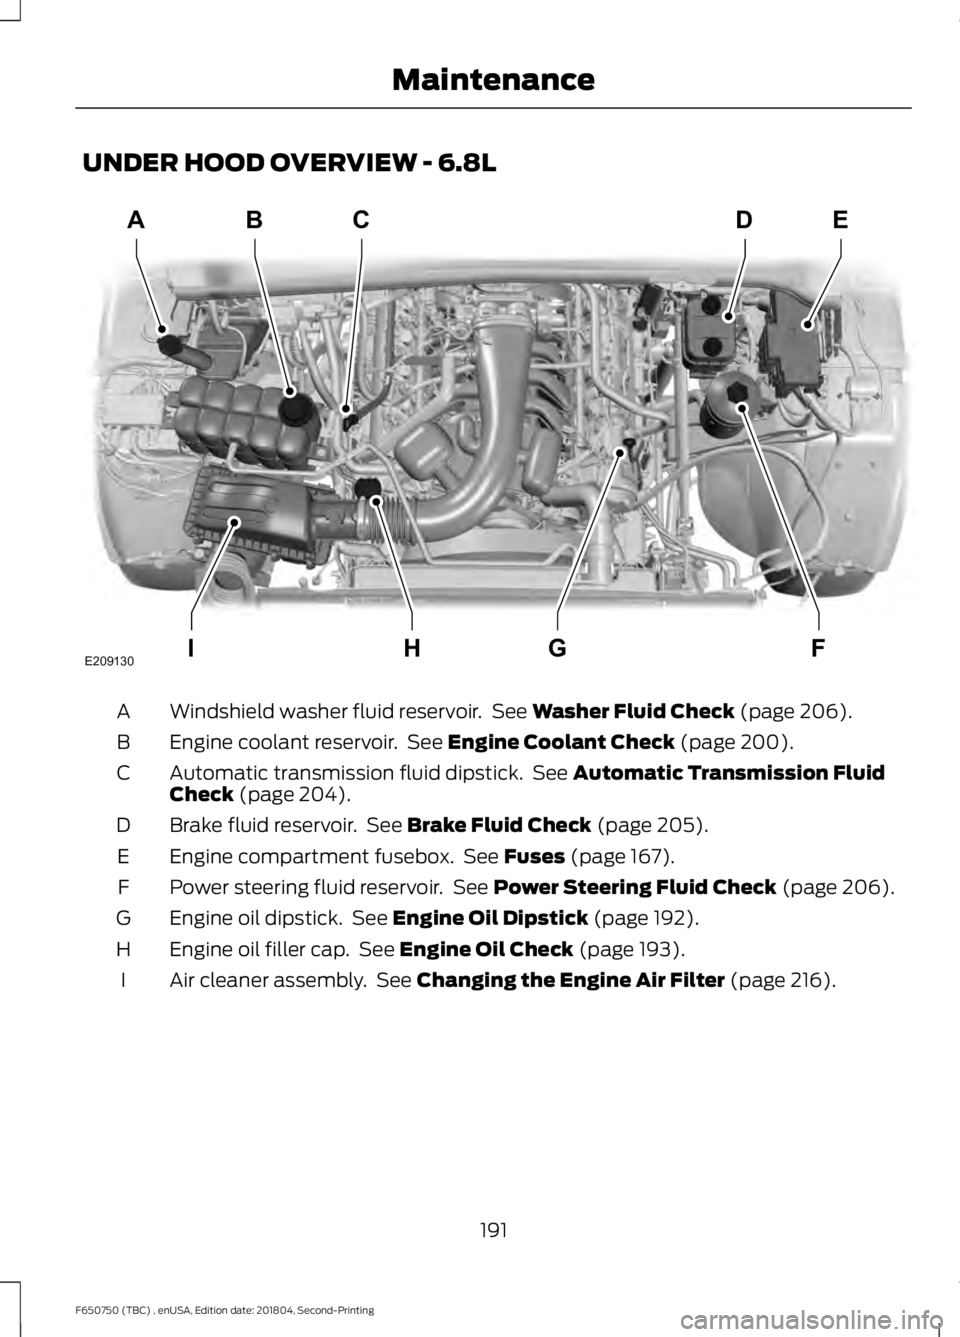 FORD F650/750 2019  Owners Manual UNDER HOOD OVERVIEW - 6.8L
Windshield washer fluid reservoir.  See Washer Fluid Check (page 206).
A
Engine coolant reservoir.  See 
Engine Coolant Check (page 200).
B
Automatic transmission fluid dips